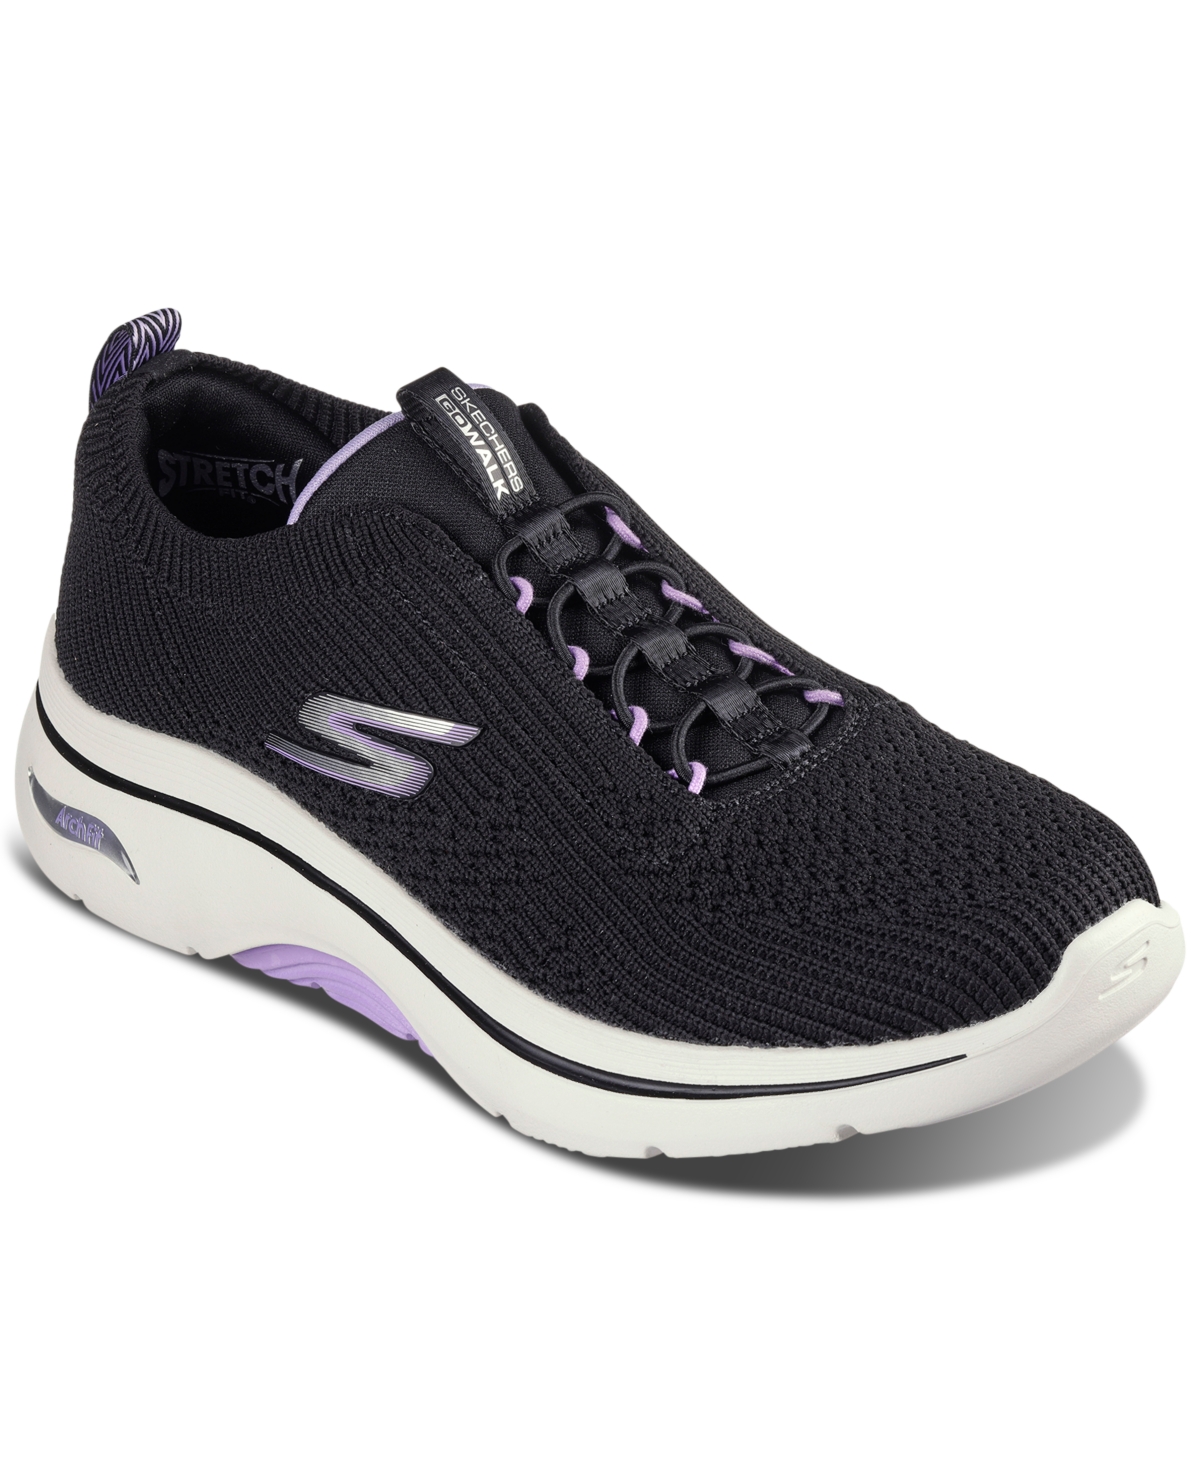 Women's Go Walk Arch Fit- Crystal Waves Walking Sneakers from Finish Line - Black, Lavender